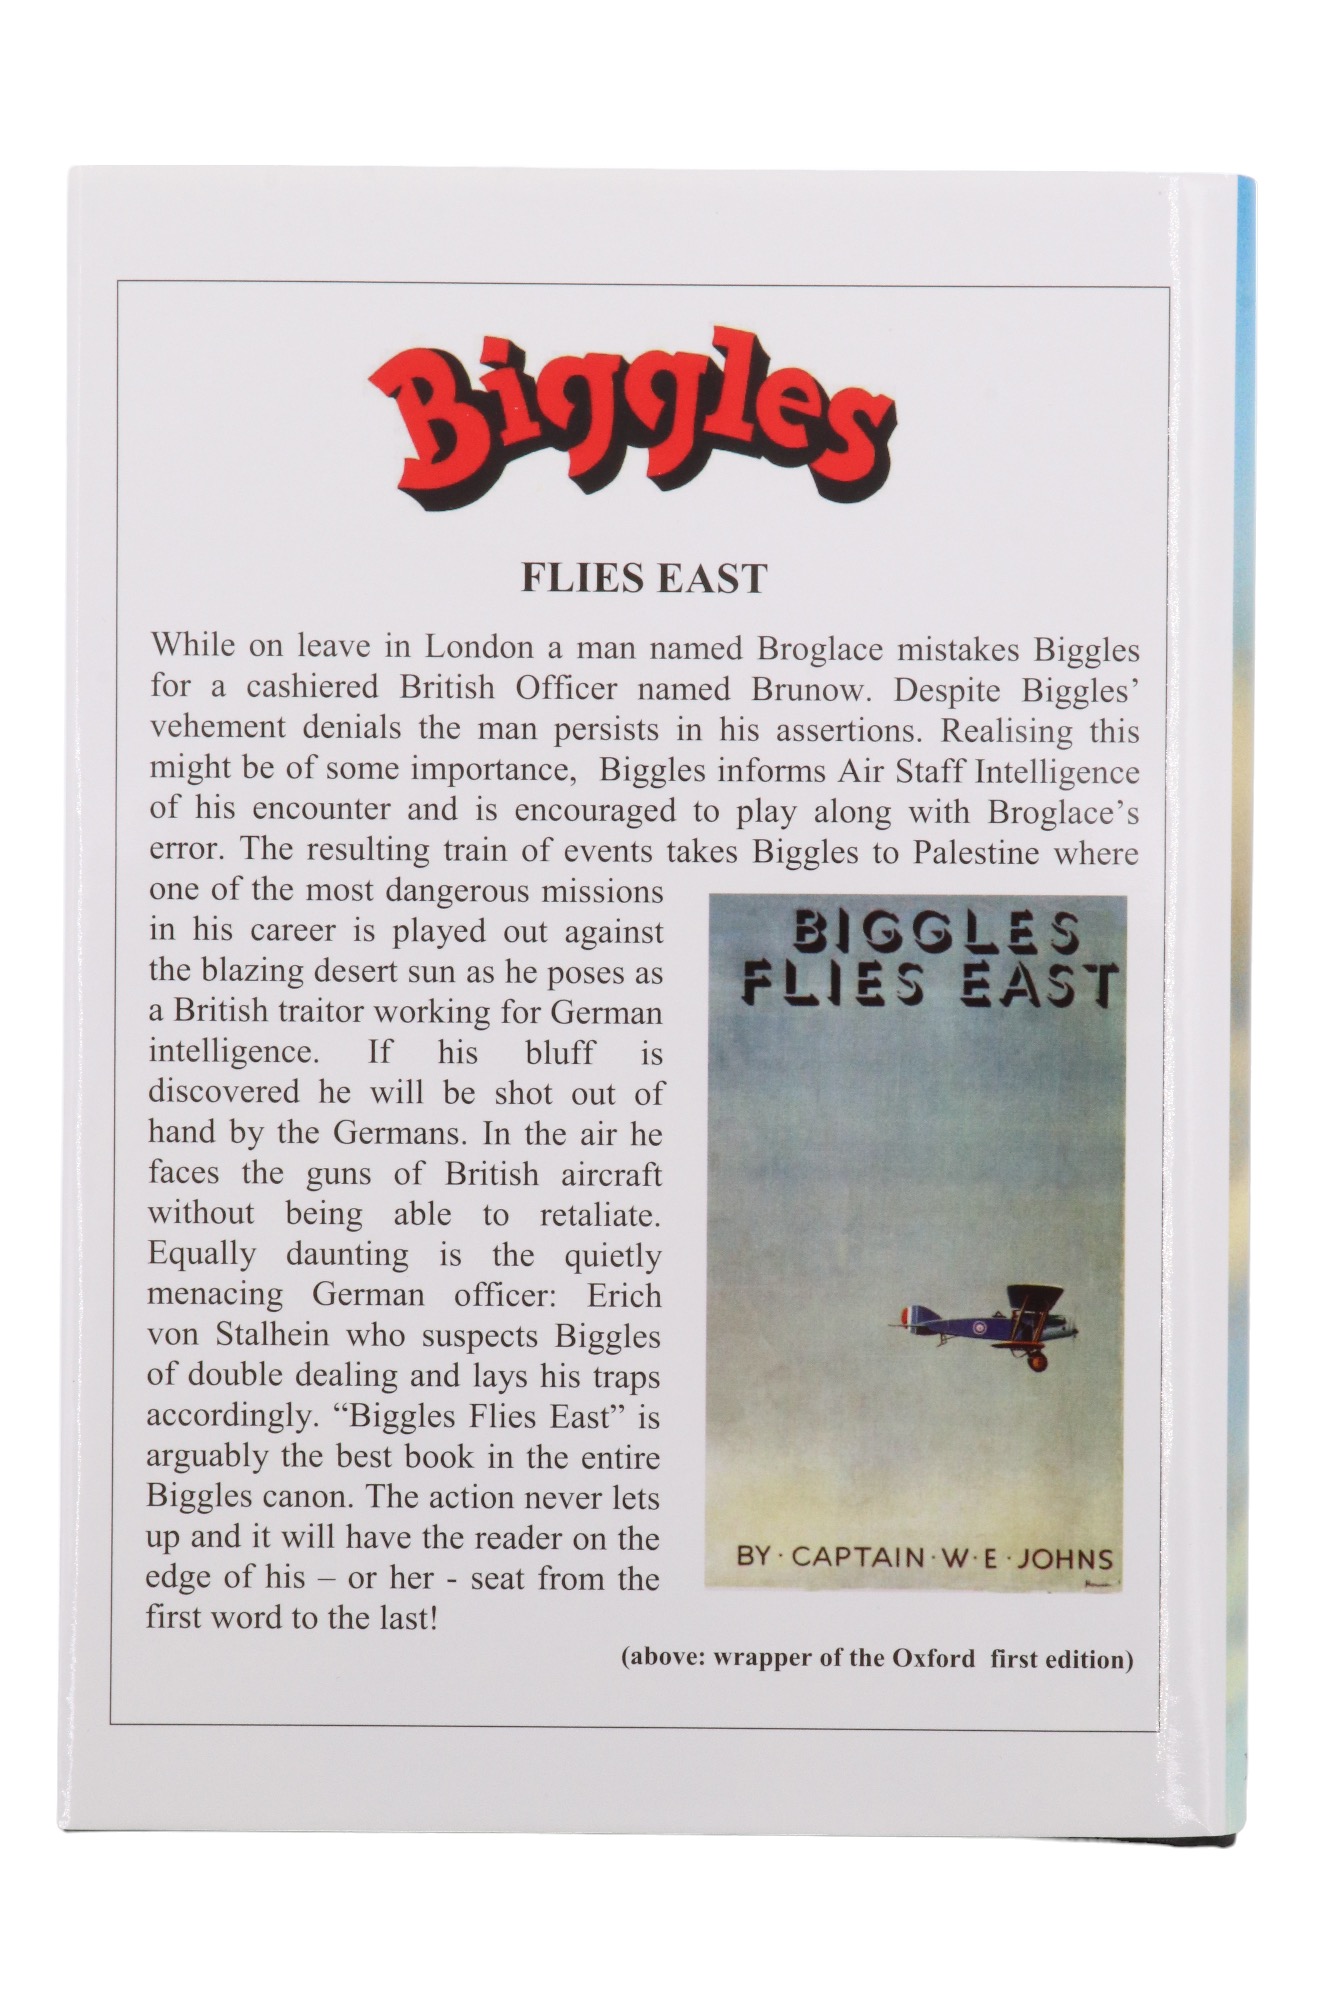 Captain W E Johns, "Biggles Flies East", one of a limited edition of 300 copies, signed by publisher - Image 3 of 4